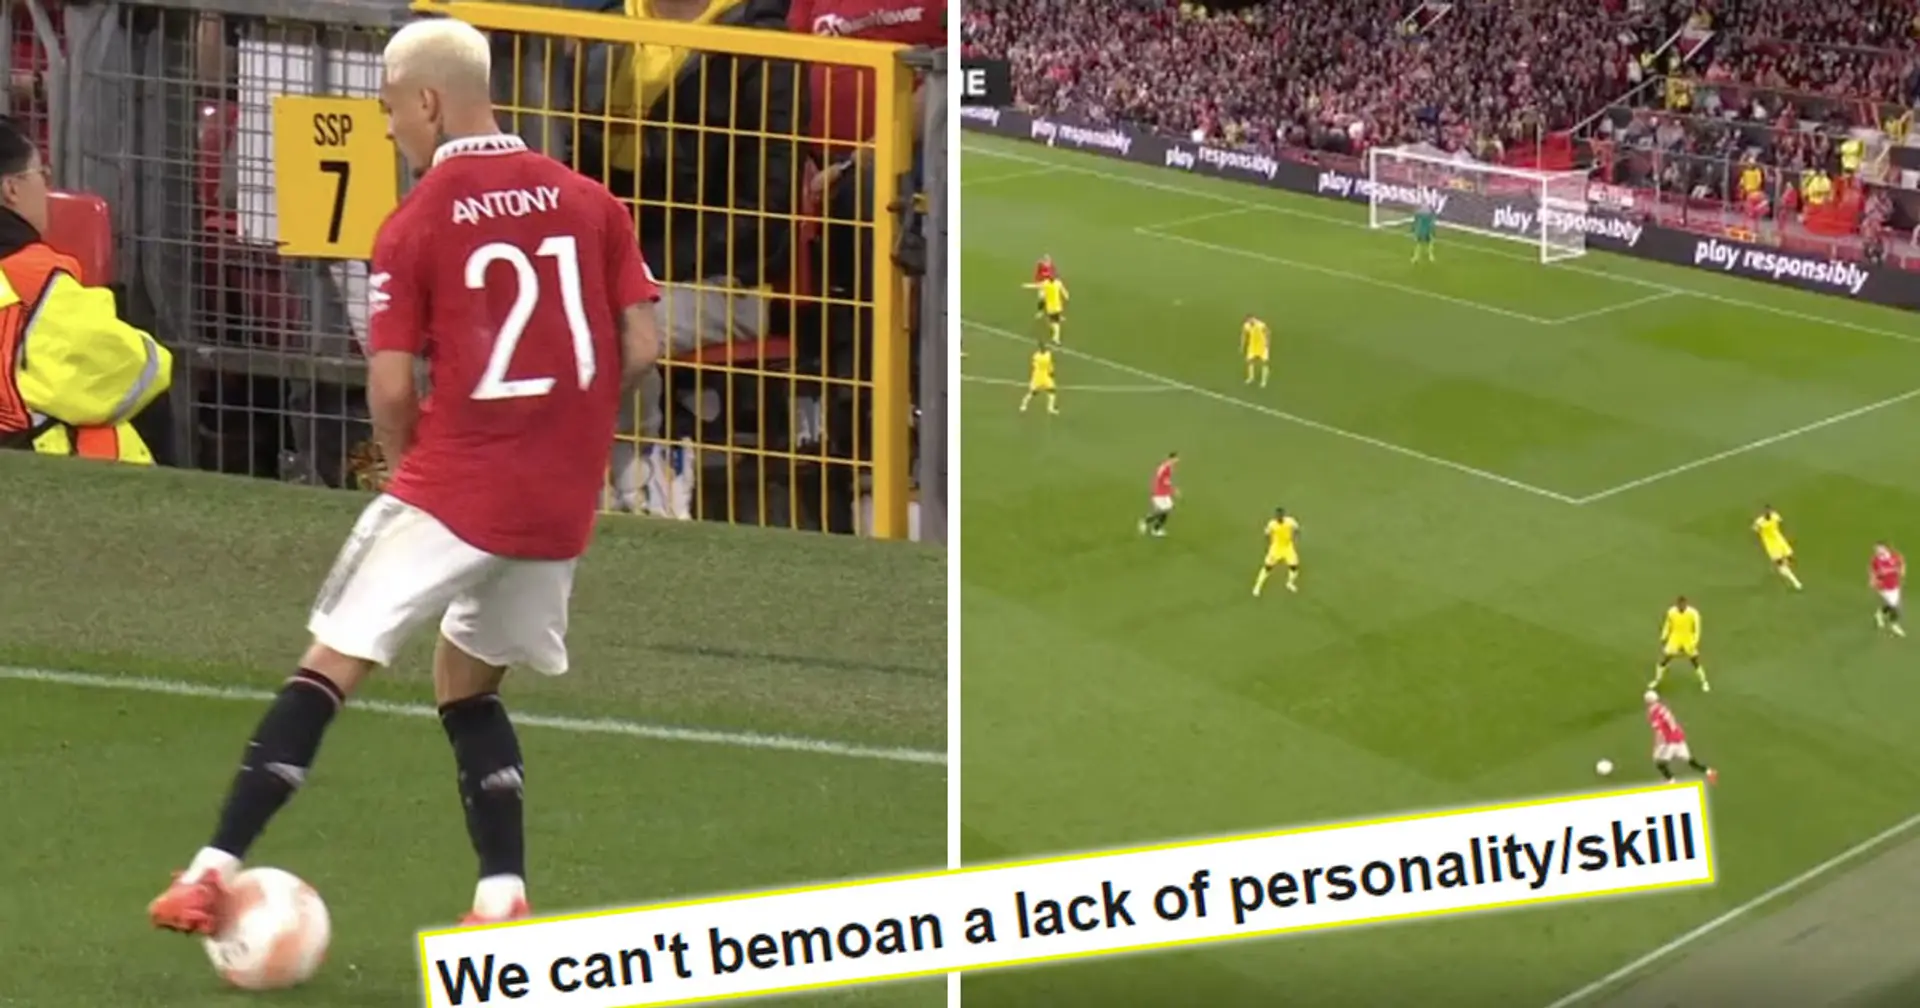 Man United fan details why Antony wasn't wrong for his turning skill - shown in pics